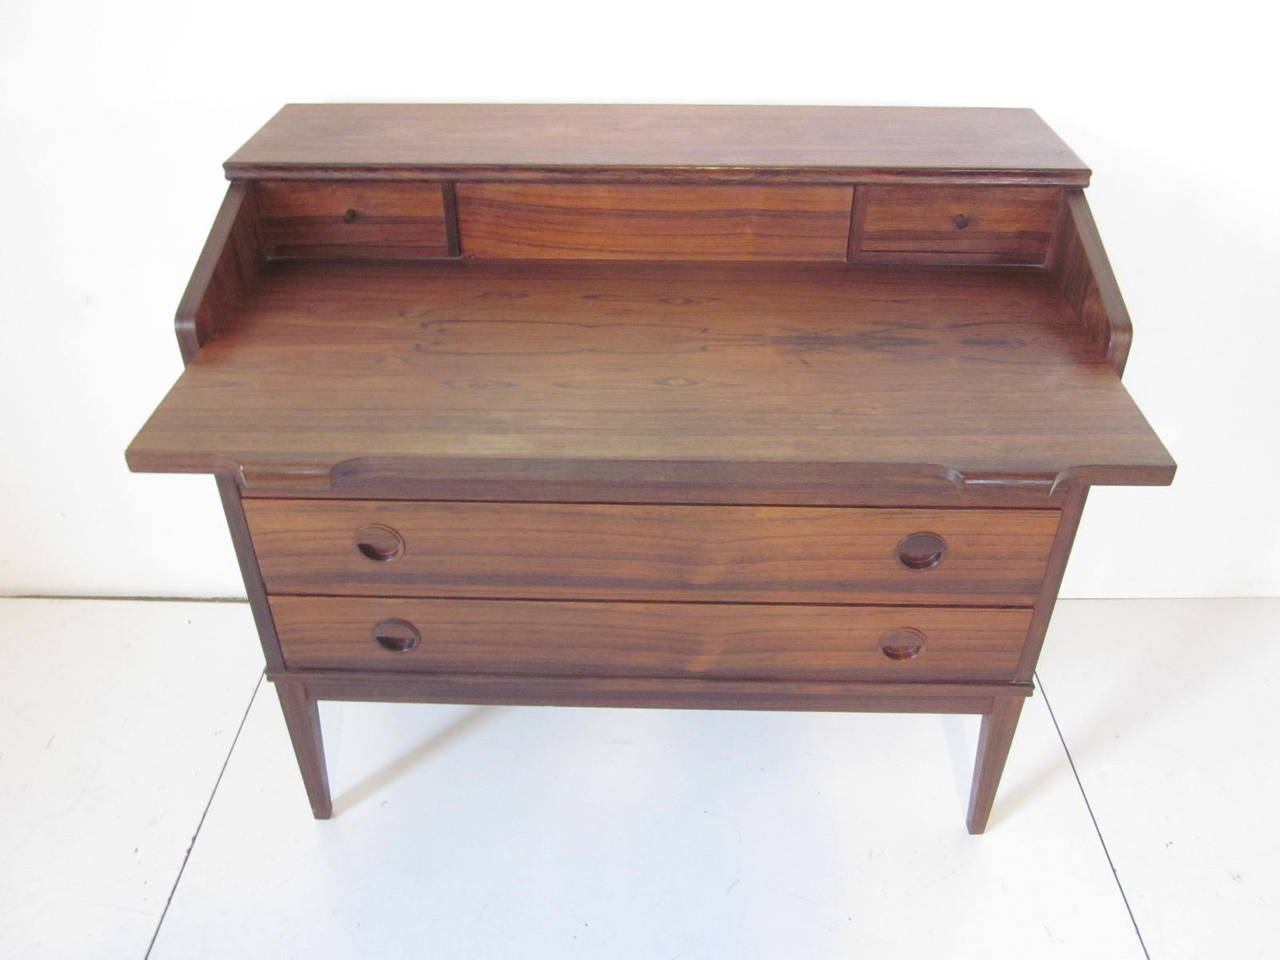 A richly grained Brazilian rosewood desk with pull-out desk top, three large lower drawers and two upper small drawers. Nice rounded integrated pulls to the drawer fronts, making this small scaled desk perfect for a tight location. Manufactures